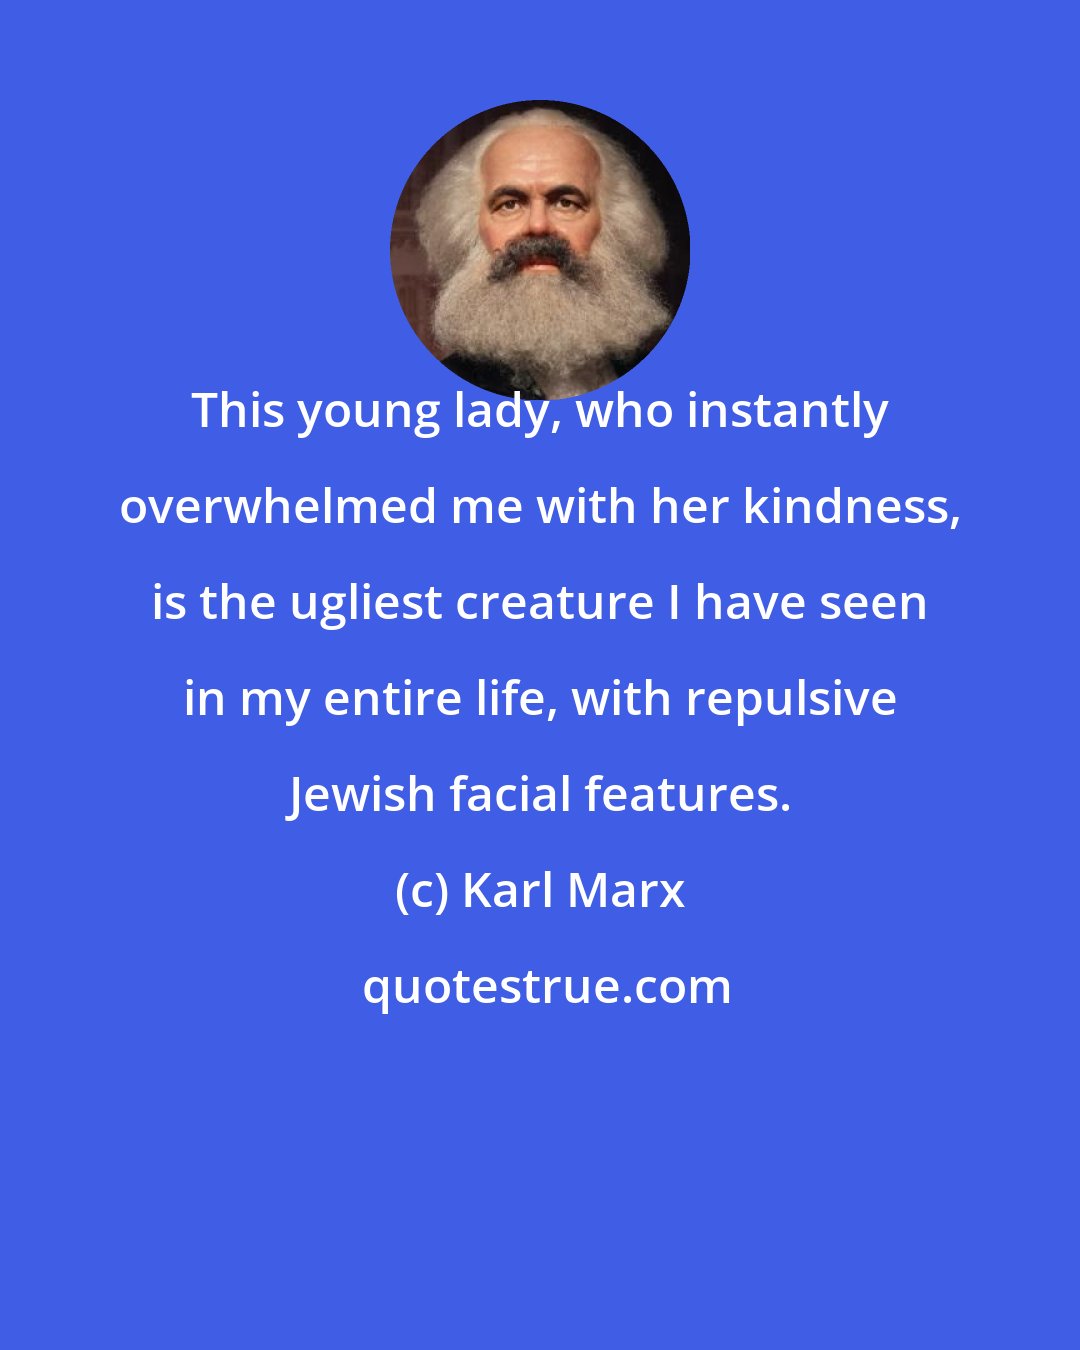 Karl Marx: This young lady, who instantly overwhelmed me with her kindness, is the ugliest creature I have seen in my entire life, with repulsive Jewish facial features.